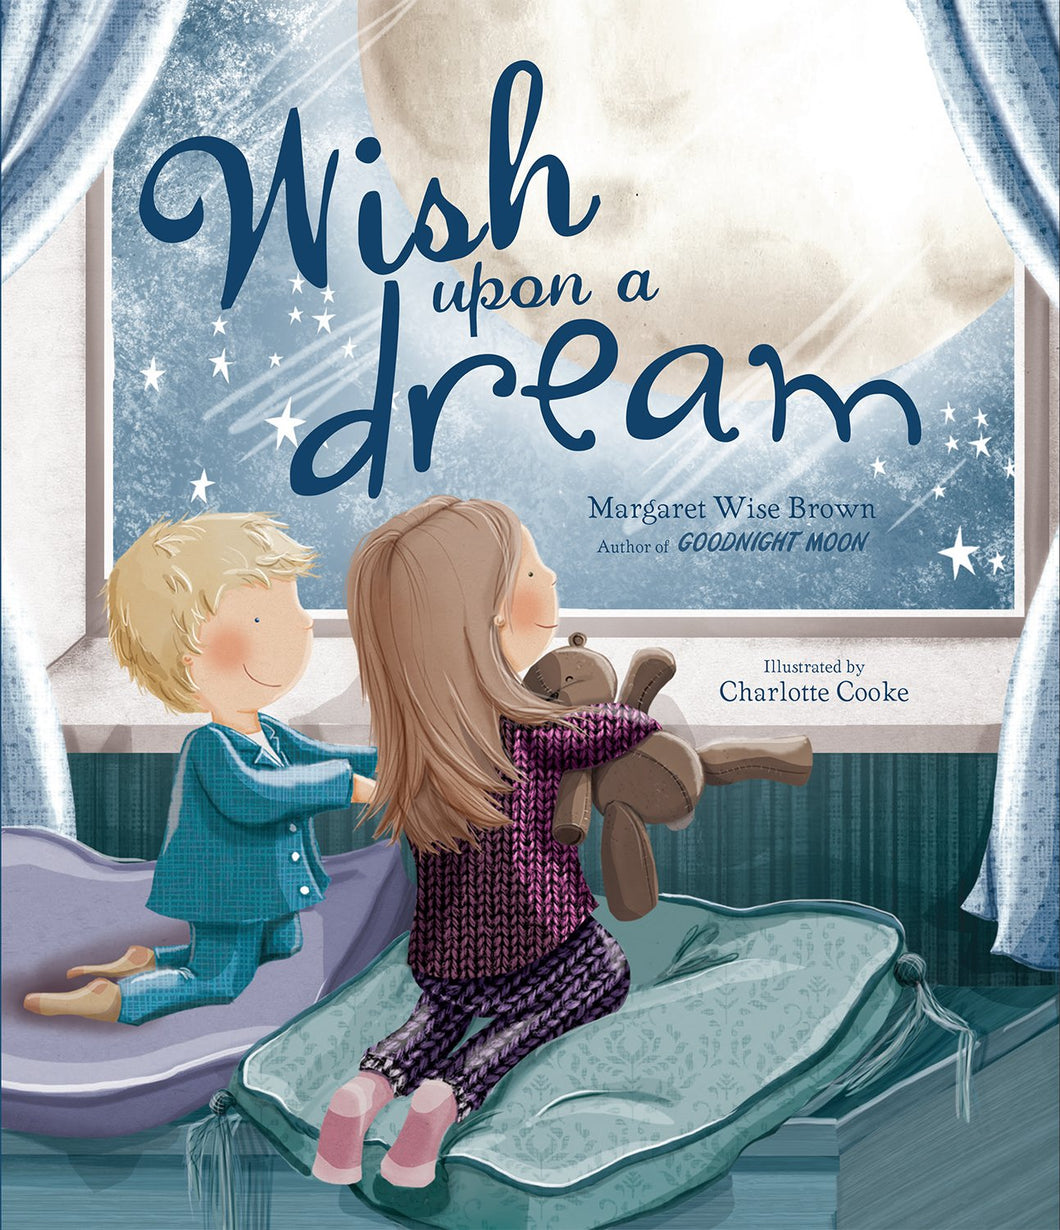 Wish Upon A Dream by Margaret Wise Brown / Hardcover - NEW BOOK